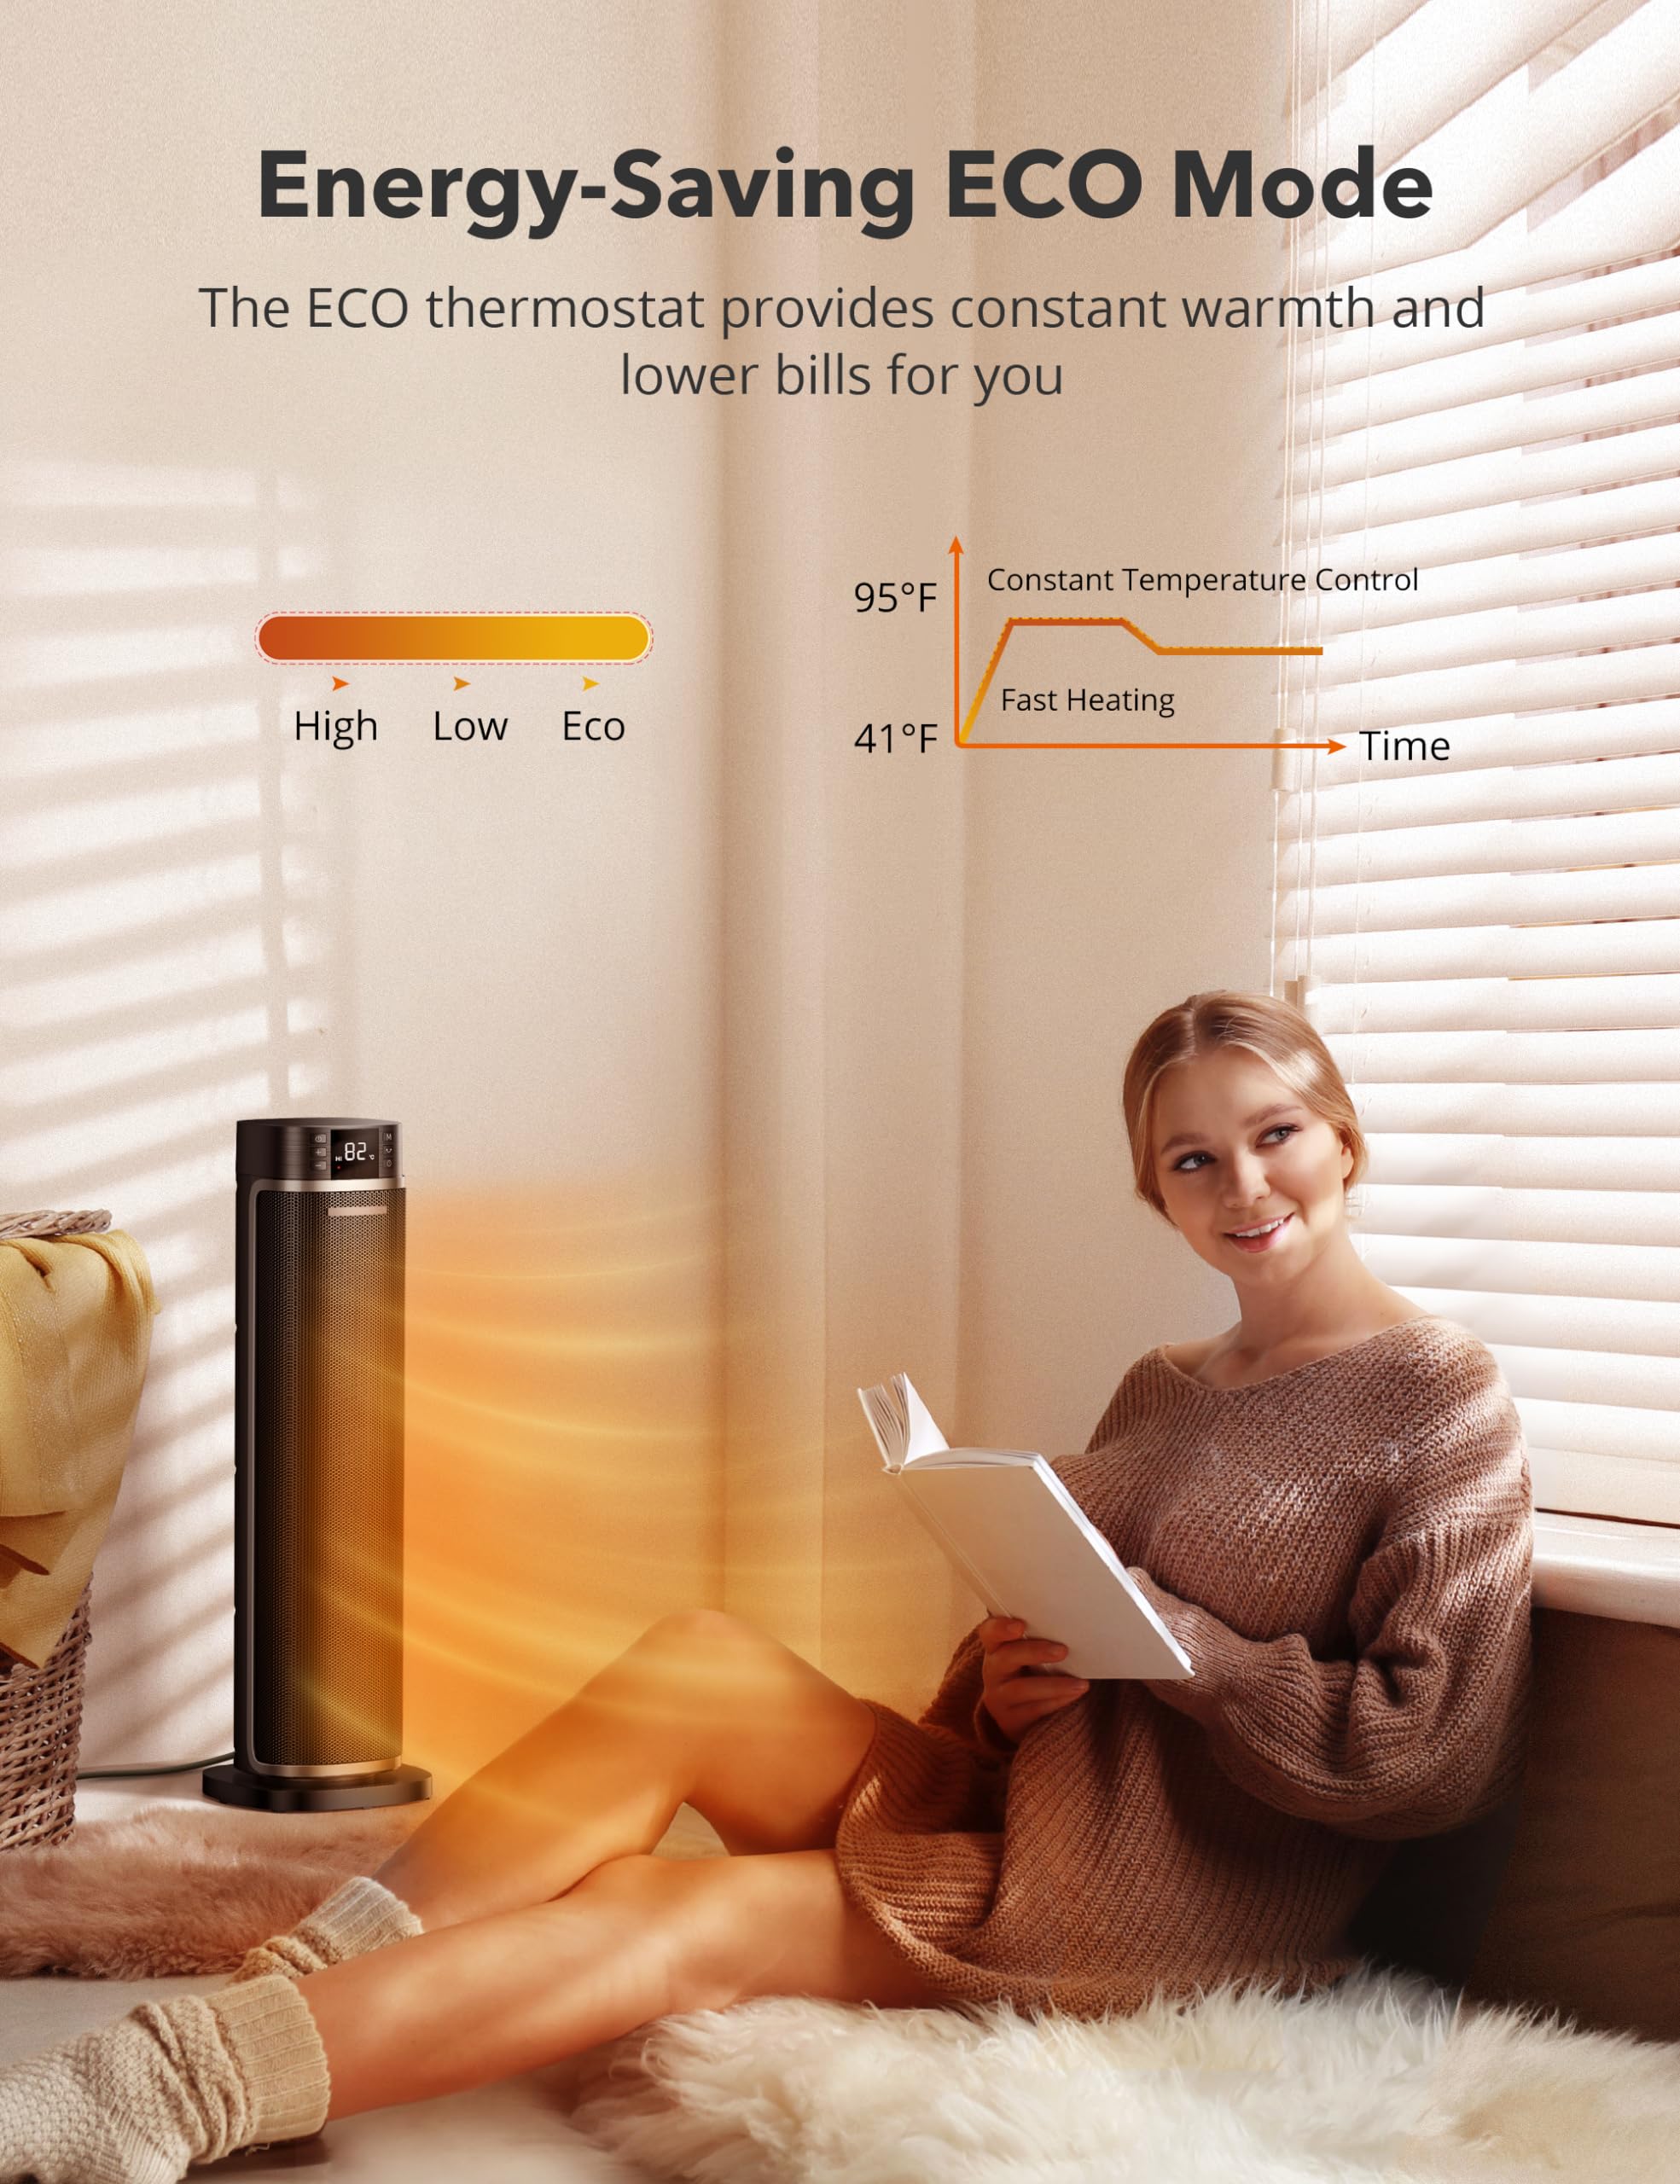 TaoTronics HE001 Space Heater, 1500W Electric Portable Fast Heating Widespread Oscillation ECO Mode 12 Hrs Timer with Remote Control for Indoor Use Home, Small, Black